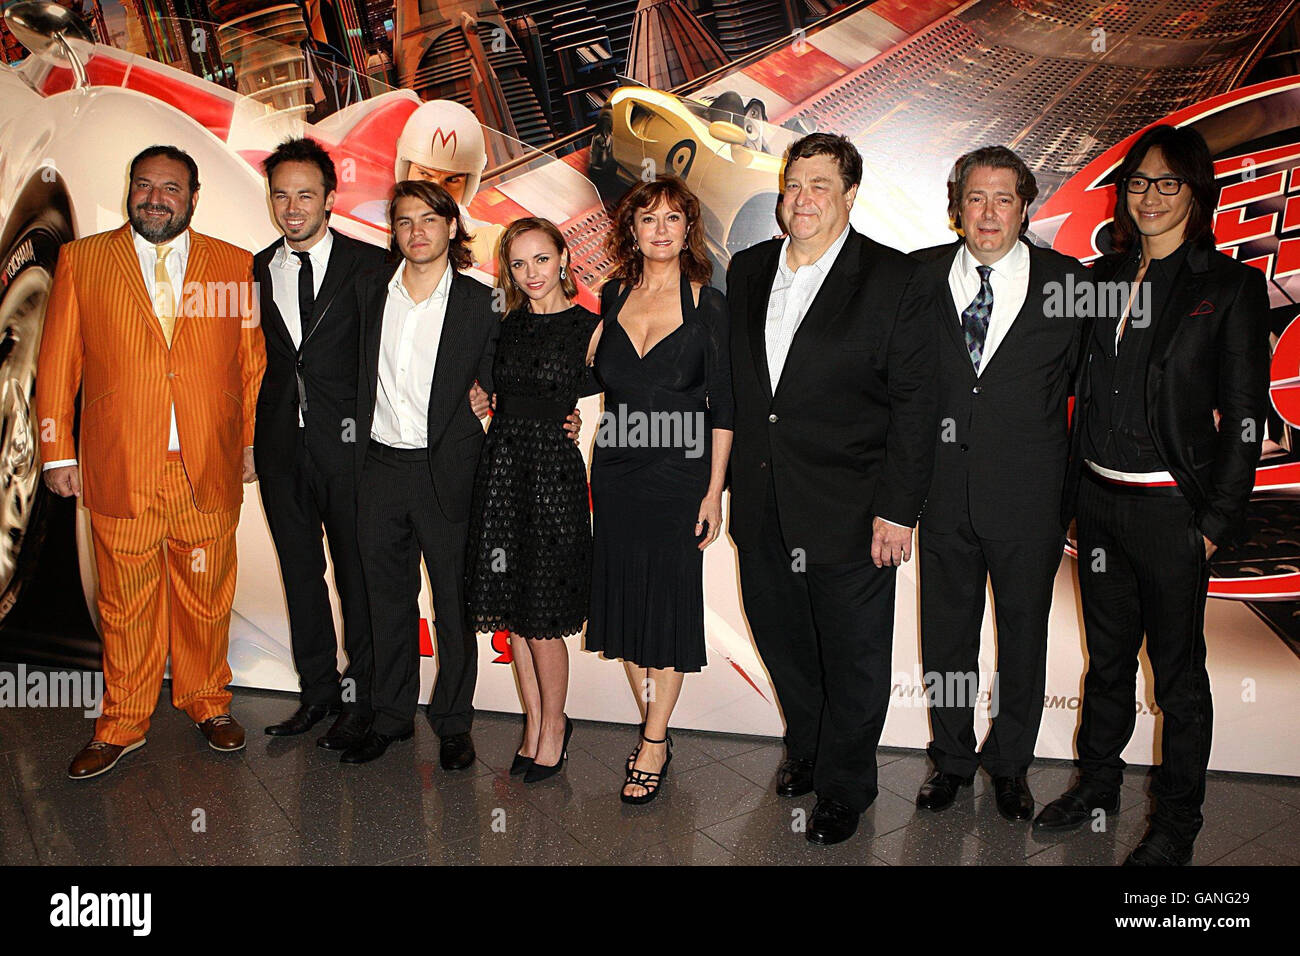 Cast and crew members (left-right) producer Joel Silver, Kirk Gurry, Emile Hirsch, Christina Ricci, Susan Sarandon, John Goodman, Roger Allam and Rain arrive for the UK premiere of Speed Racer at the Empire Leicester Square in central London. Stock Photo